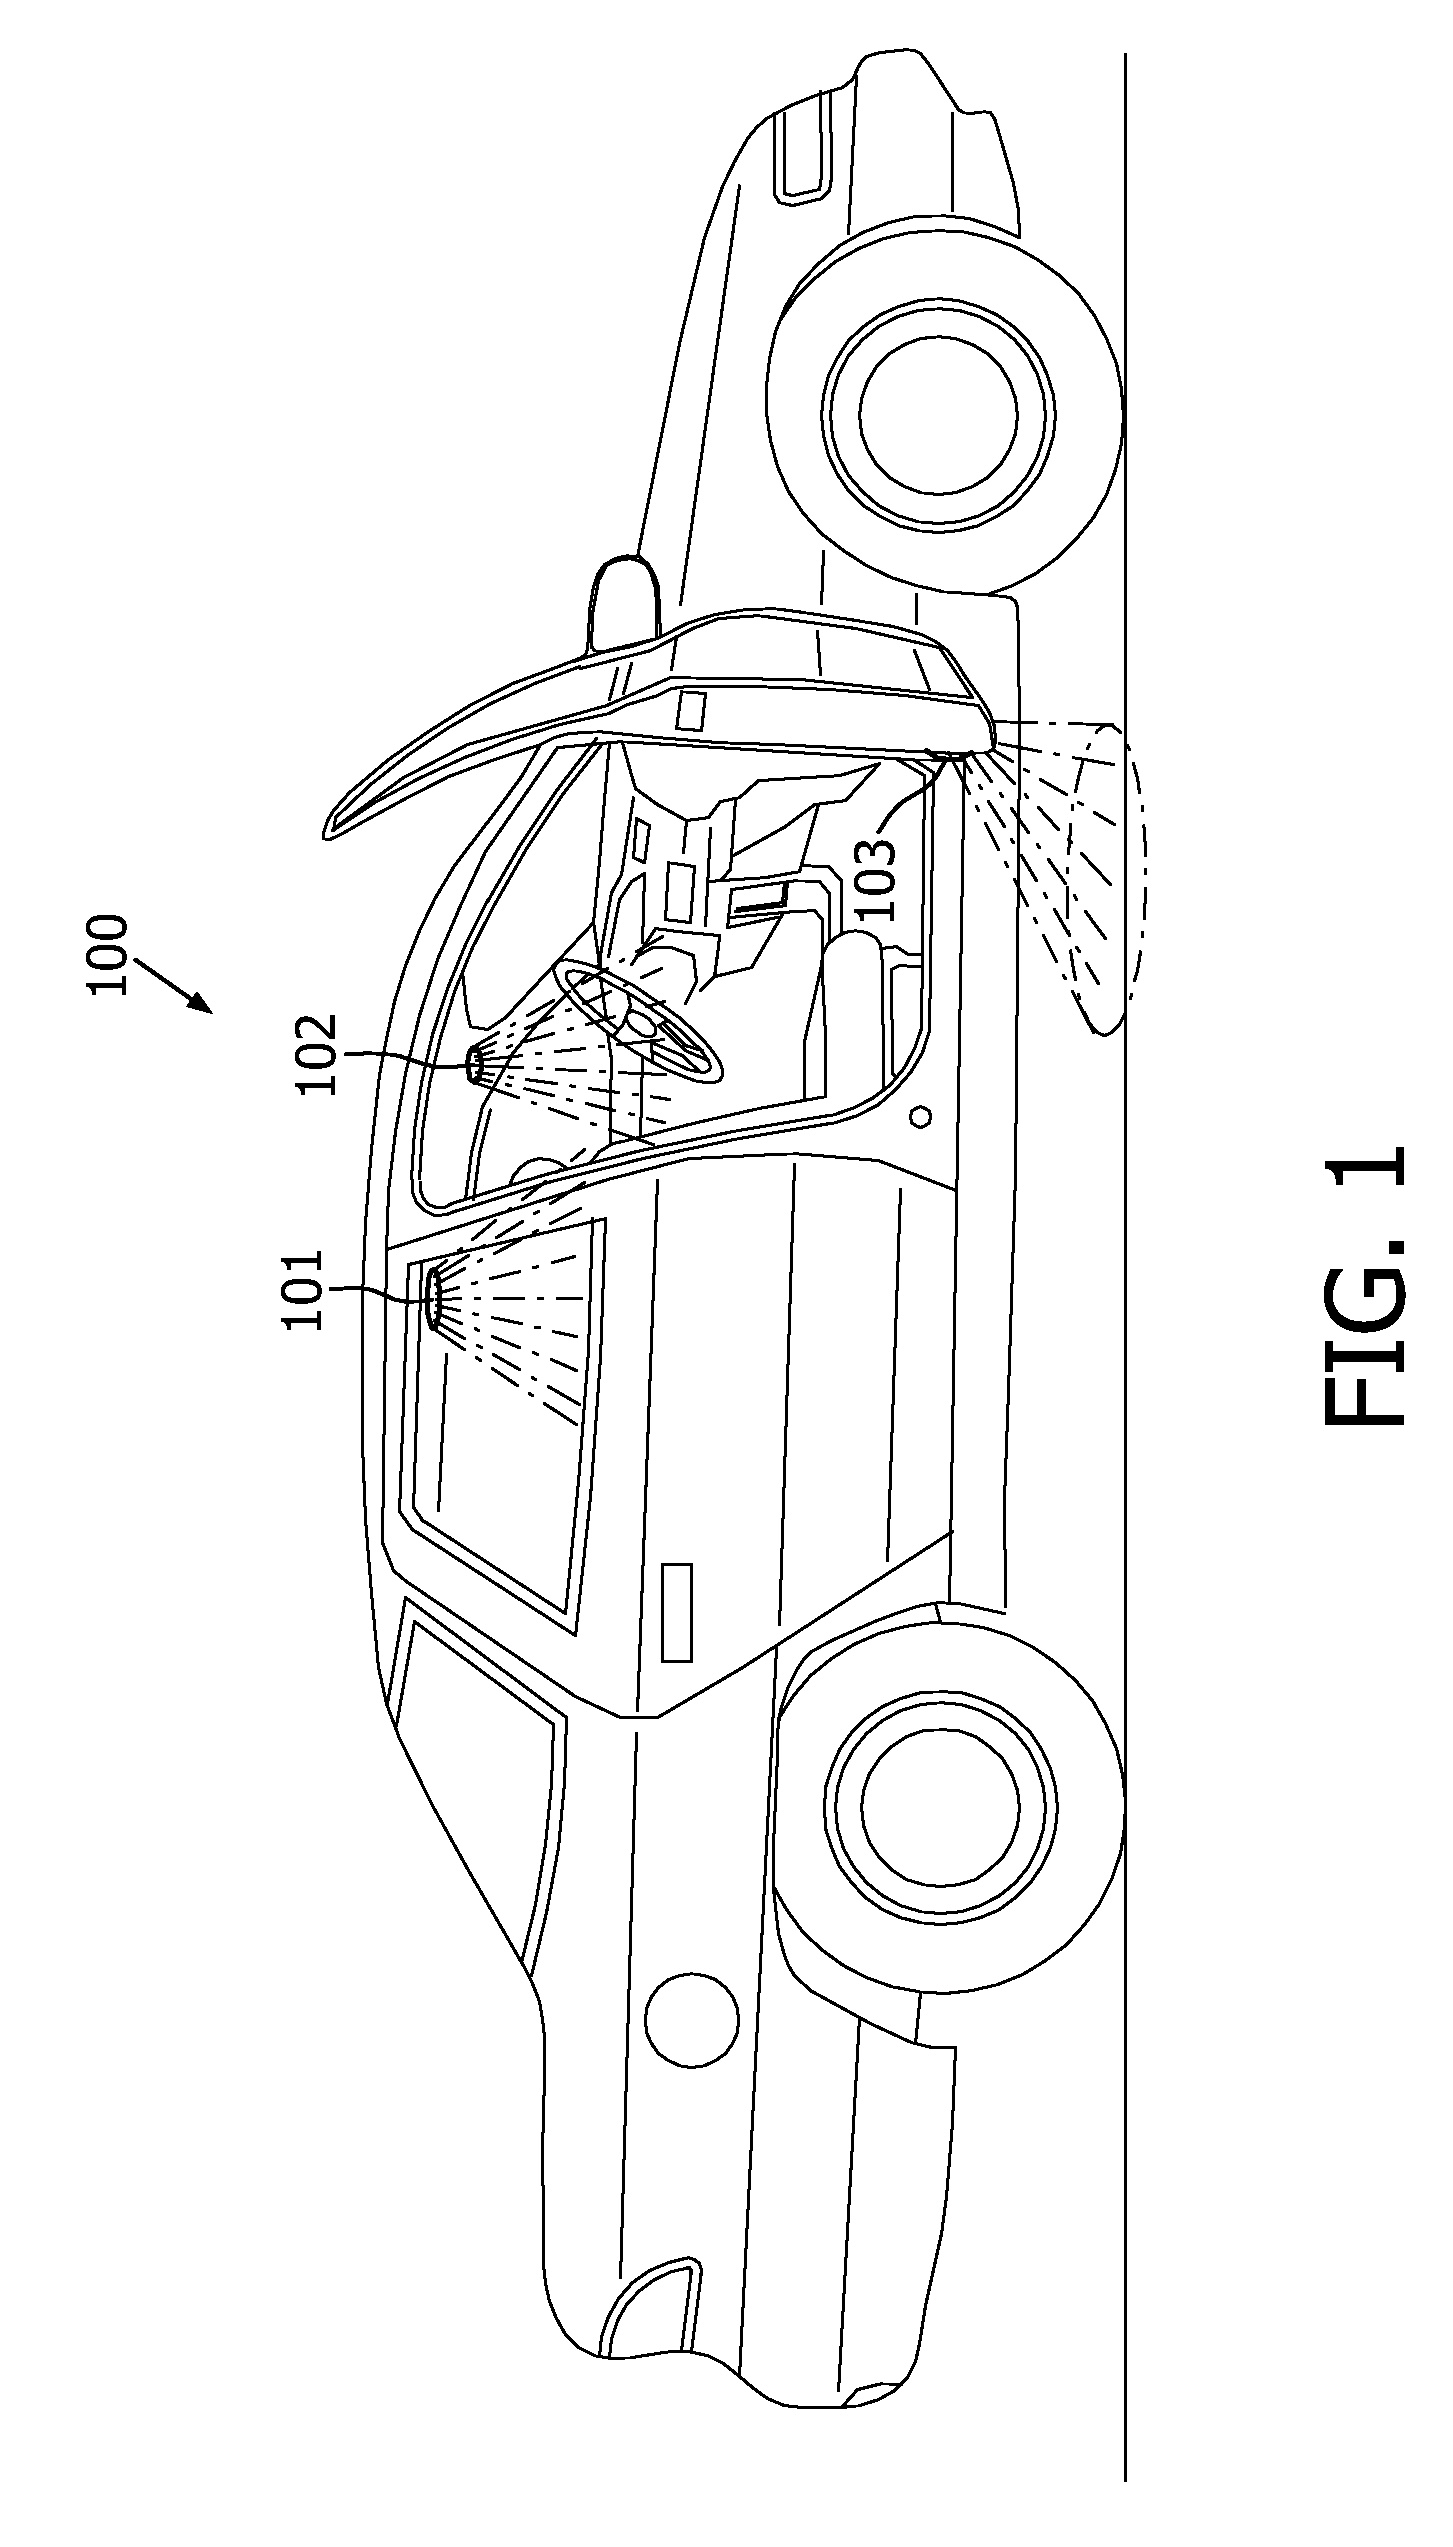 Light Module For Producing Light With a Scattering Pattern That is Electrically Variable and Use Thereof as a Multiple Purpose Light